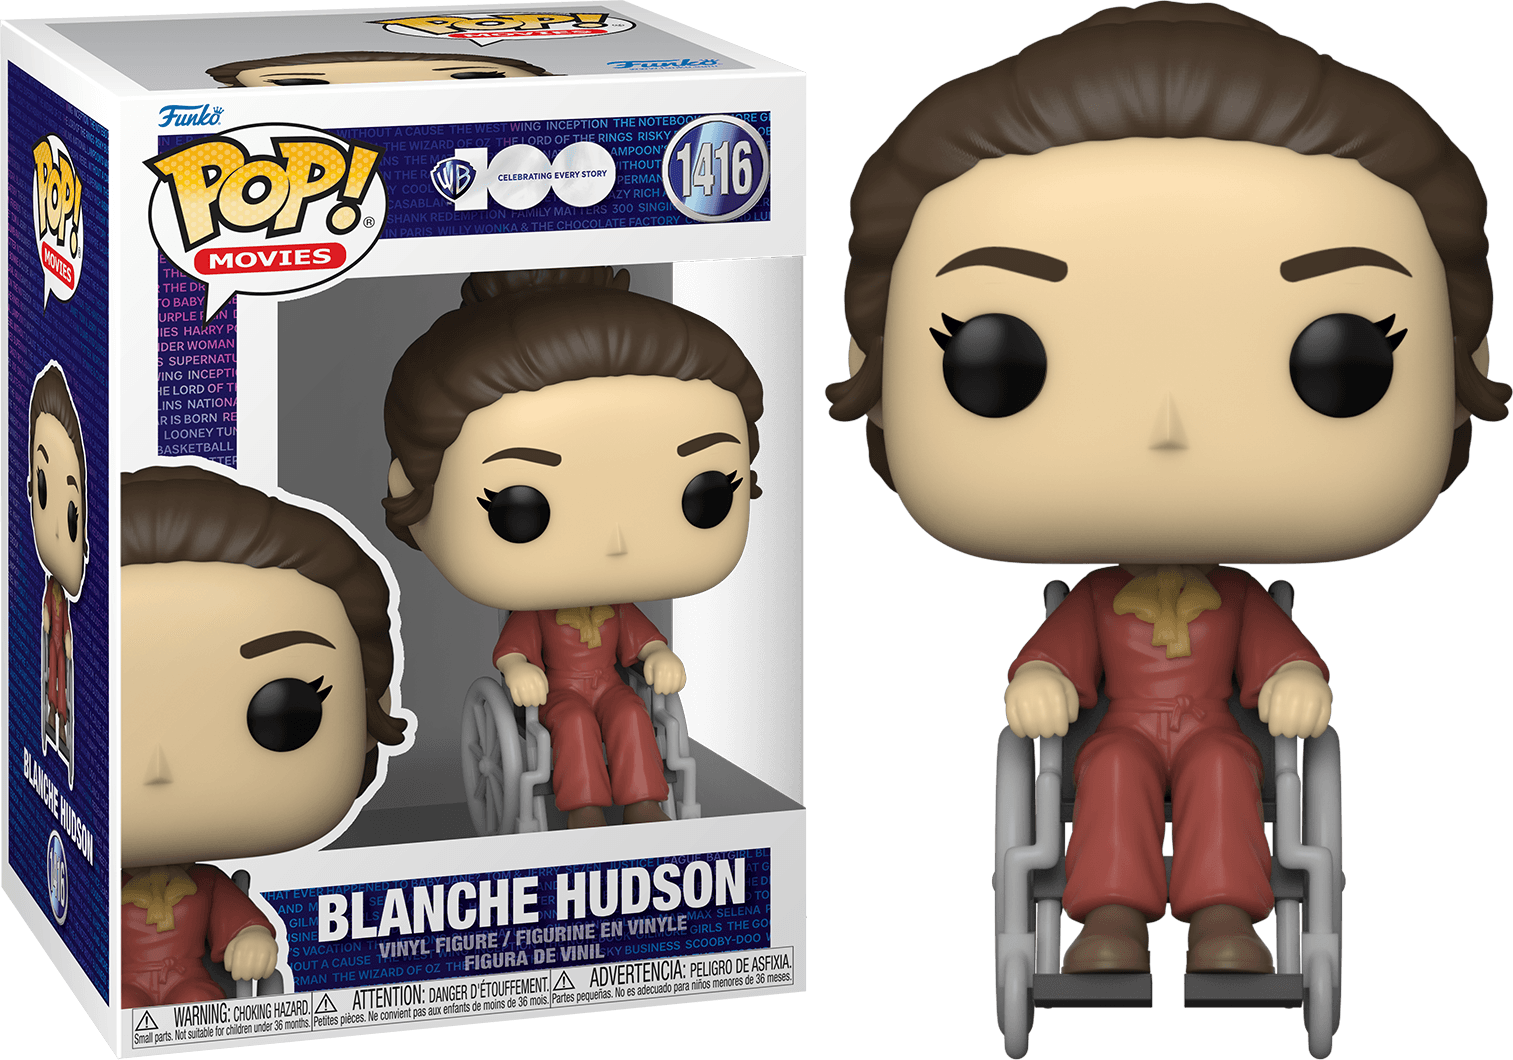 FUN72324 What Ever Happened to Baby Jane - Blanche (with Chase) Pop! Vinyl - Funko - Titan Pop Culture